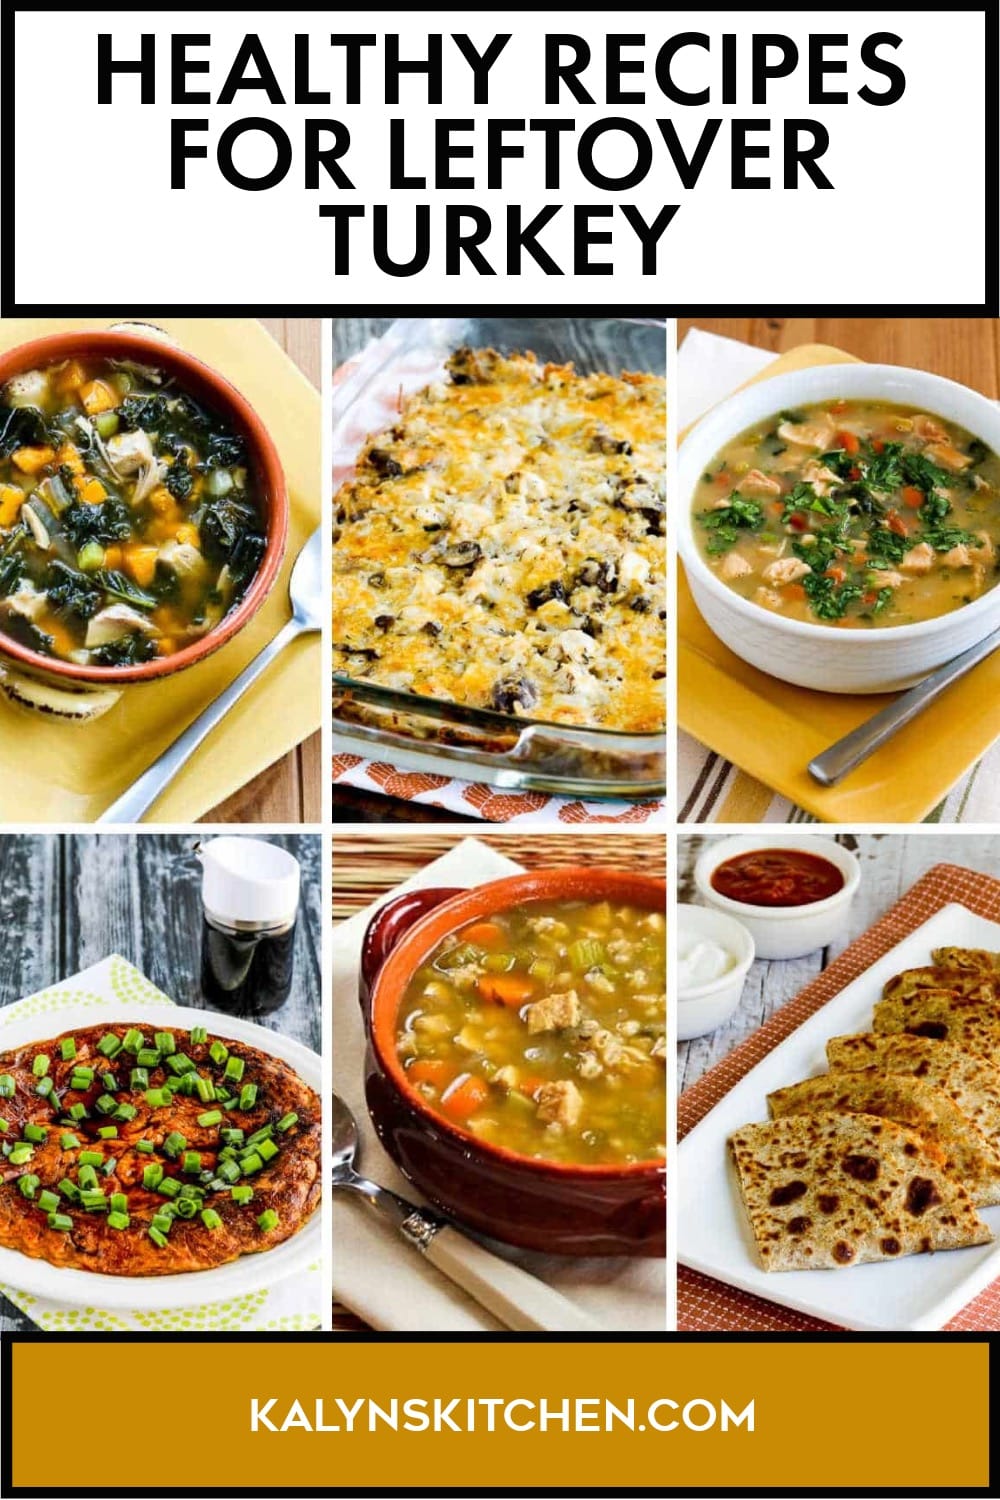 Pinterest image of Healthy Recipes for Leftover Turkey